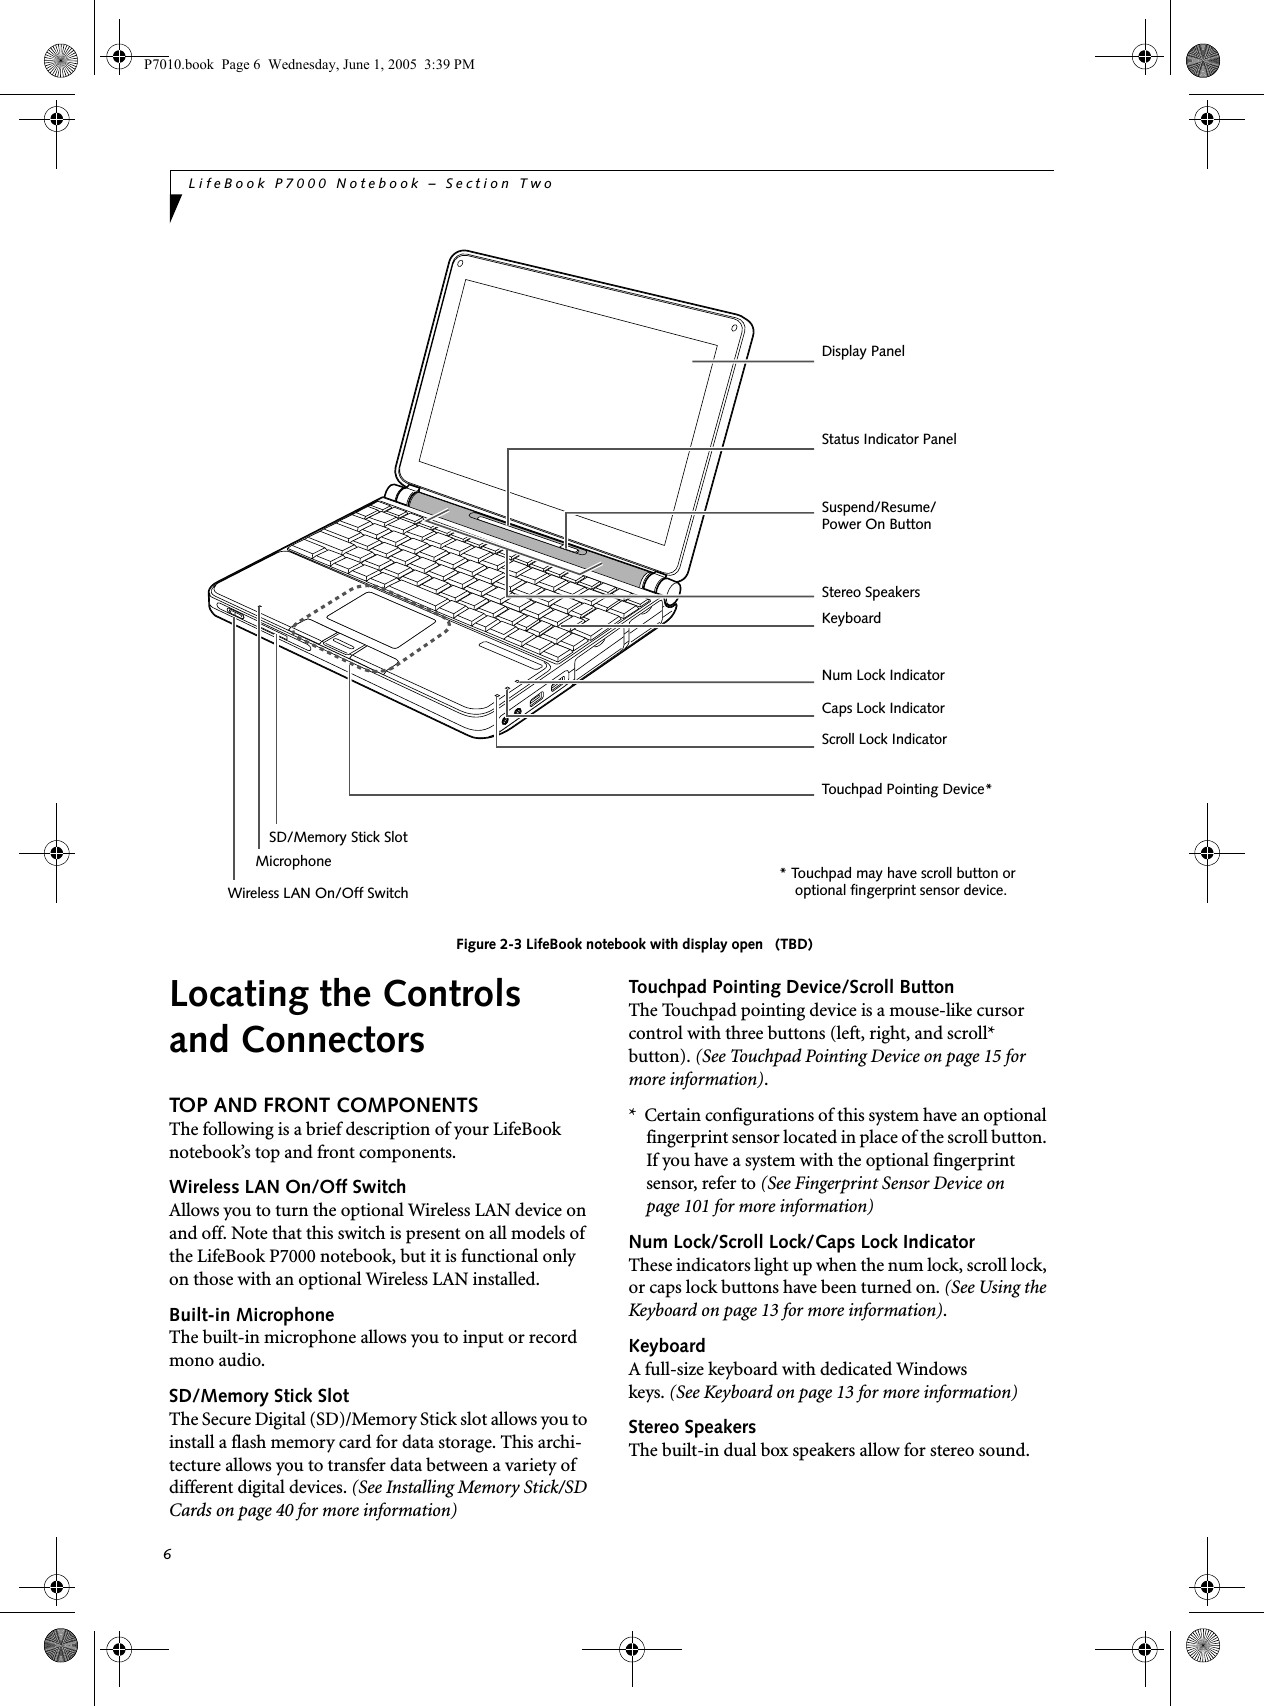 6LifeBook P7000 Notebook – Section TwoFigure 2-3 LifeBook notebook with display open   (TBD)Locating the Controlsand ConnectorsTOP AND FRONT COMPONENTSThe following is a brief description of your LifeBook notebook’s top and front components. Wireless LAN On/Off SwitchAllows you to turn the optional Wireless LAN device on and off. Note that this switch is present on all models of the LifeBook P7000 notebook, but it is functional only on those with an optional Wireless LAN installed. Built-in MicrophoneThe built-in microphone allows you to input or record mono audio.SD/Memory Stick SlotThe Secure Digital (SD)/Memory Stick slot allows you to install a flash memory card for data storage. This archi-tecture allows you to transfer data between a variety of different digital devices. (See Installing Memory Stick/SD Cards on page 40 for more information)Touchpad Pointing Device/Scroll ButtonThe Touchpad pointing device is a mouse-like cursor control with three buttons (left, right, and scroll* button). (See Touchpad Pointing Device on page 15 for more information). *  Certain configurations of this system have an optional fingerprint sensor located in place of the scroll button. If you have a system with the optional fingerprint sensor, refer to (See Fingerprint Sensor Device on page 101 for more information) Num Lock/Scroll Lock/Caps Lock IndicatorThese indicators light up when the num lock, scroll lock, or caps lock buttons have been turned on. (See Using the Keyboard on page 13 for more information).KeyboardA full-size keyboard with dedicated Windowskeys. (See Keyboard on page 13 for more information)Stereo SpeakersThe built-in dual box speakers allow for stereo sound. Display PanelStatus Indicator PanelKeyboardStereo SpeakersSuspend/Resume/ Power On ButtonWireless LAN On/Off SwitchTouchpad Pointing Device*Num Lock IndicatorCaps Lock IndicatorScroll Lock IndicatorMicrophoneSD/Memory Stick Slot* Touchpad may have scroll button or     optional fingerprint sensor device. P7010.book  Page 6  Wednesday, June 1, 2005  3:39 PM